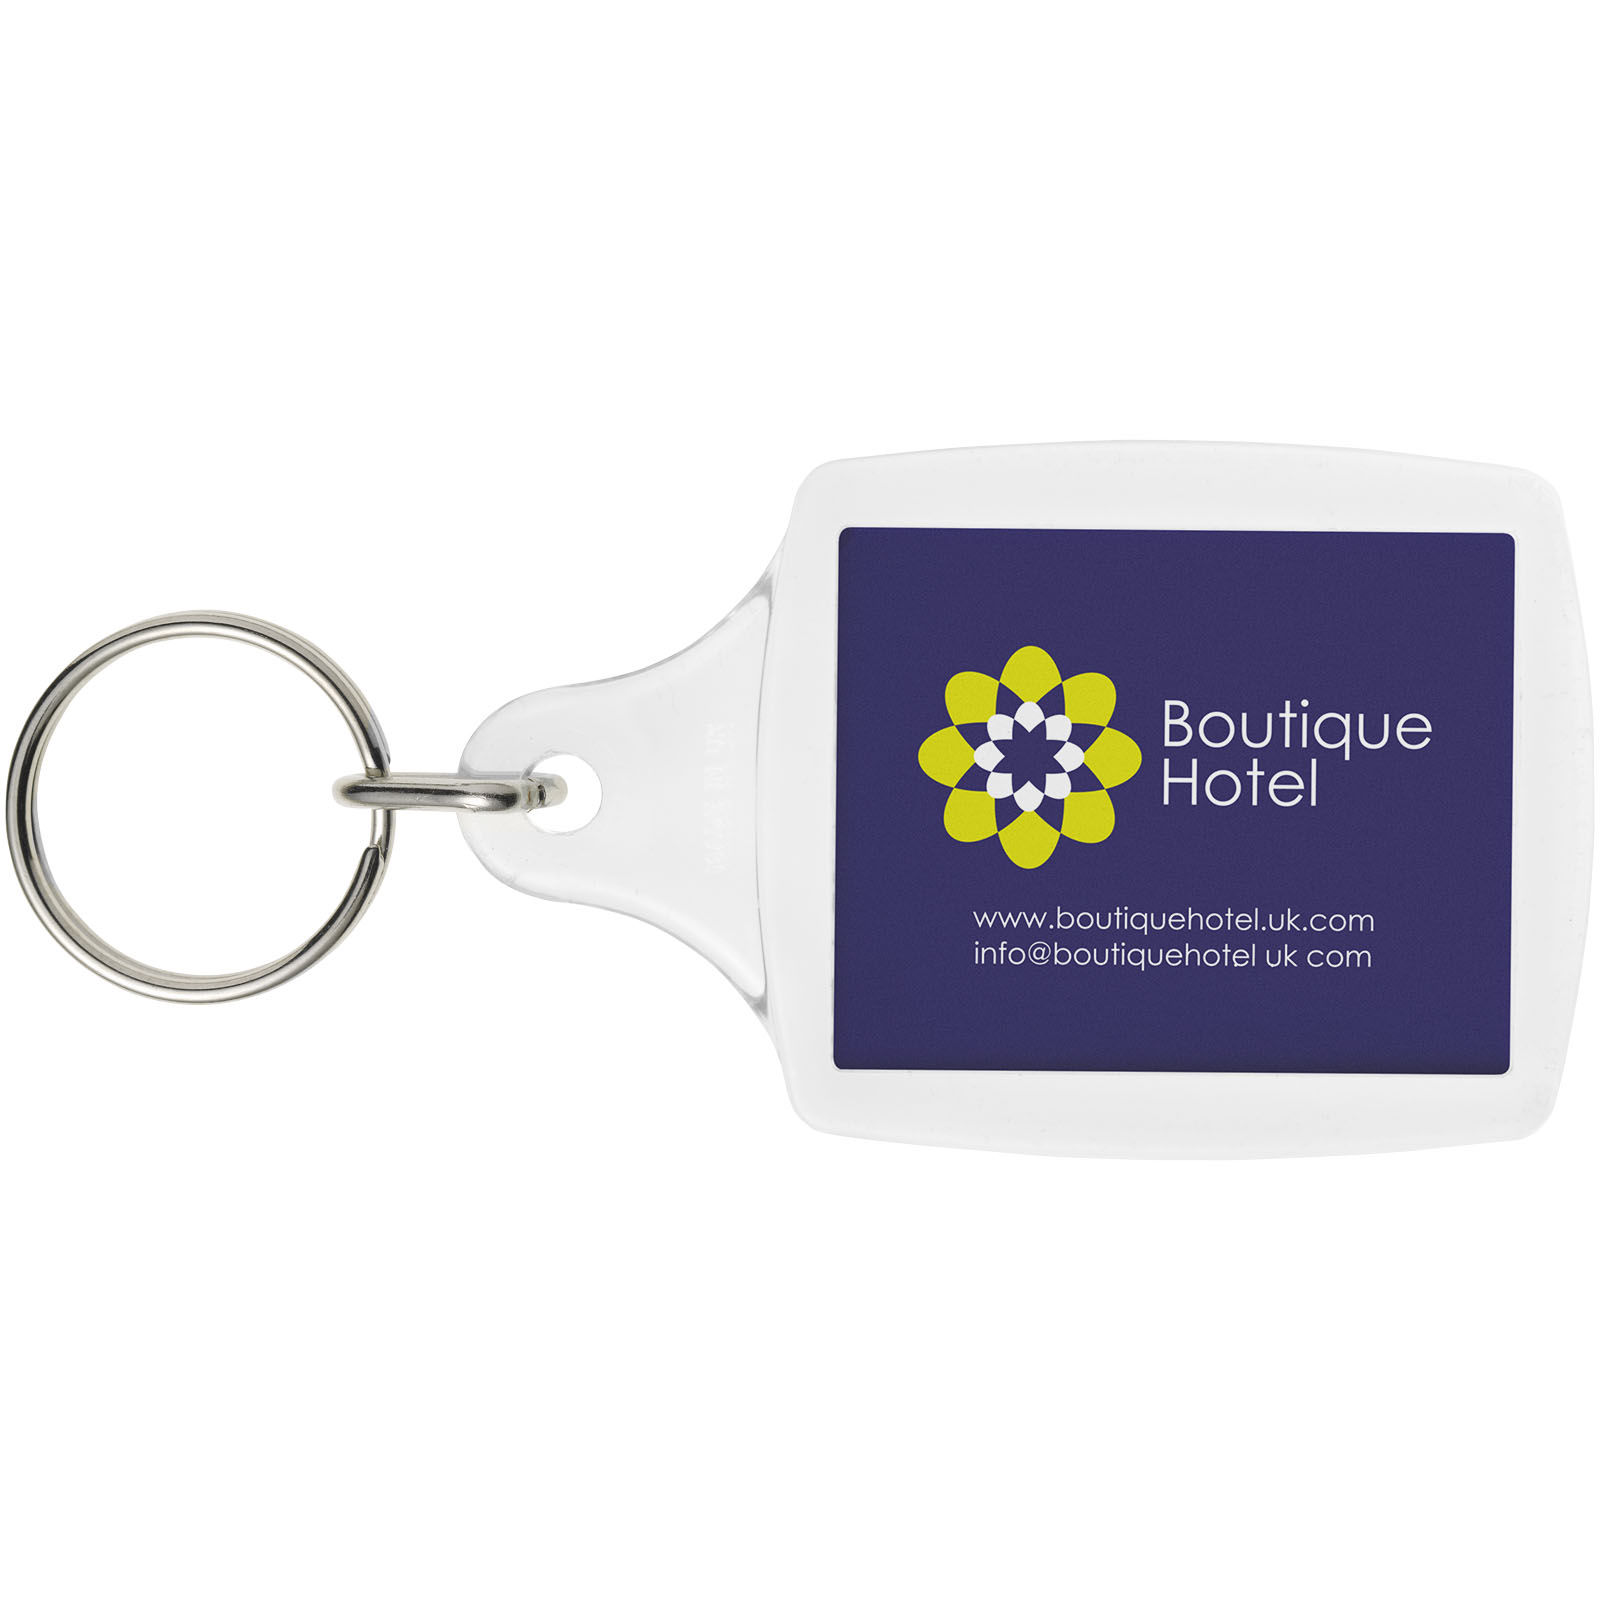 Advertising Keychains & Keyrings - Tour A5 keychain - 2